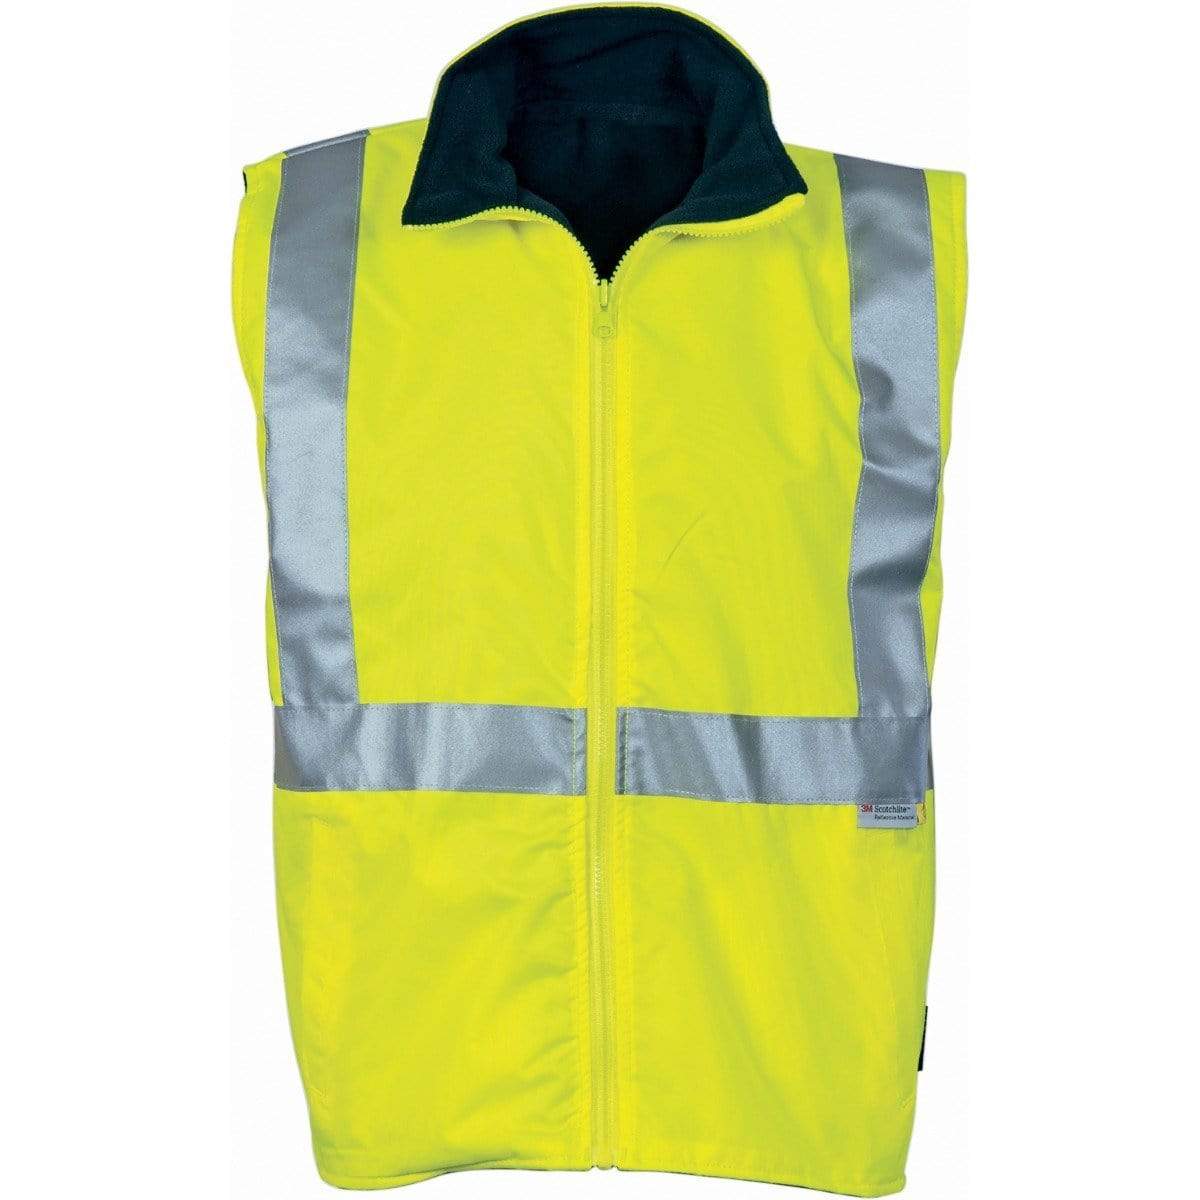 Hi-vis Reversible Vest With 3m Reflective Tape 3865-yellow/navy-m - 3865 Work Wear DNC Workwear   